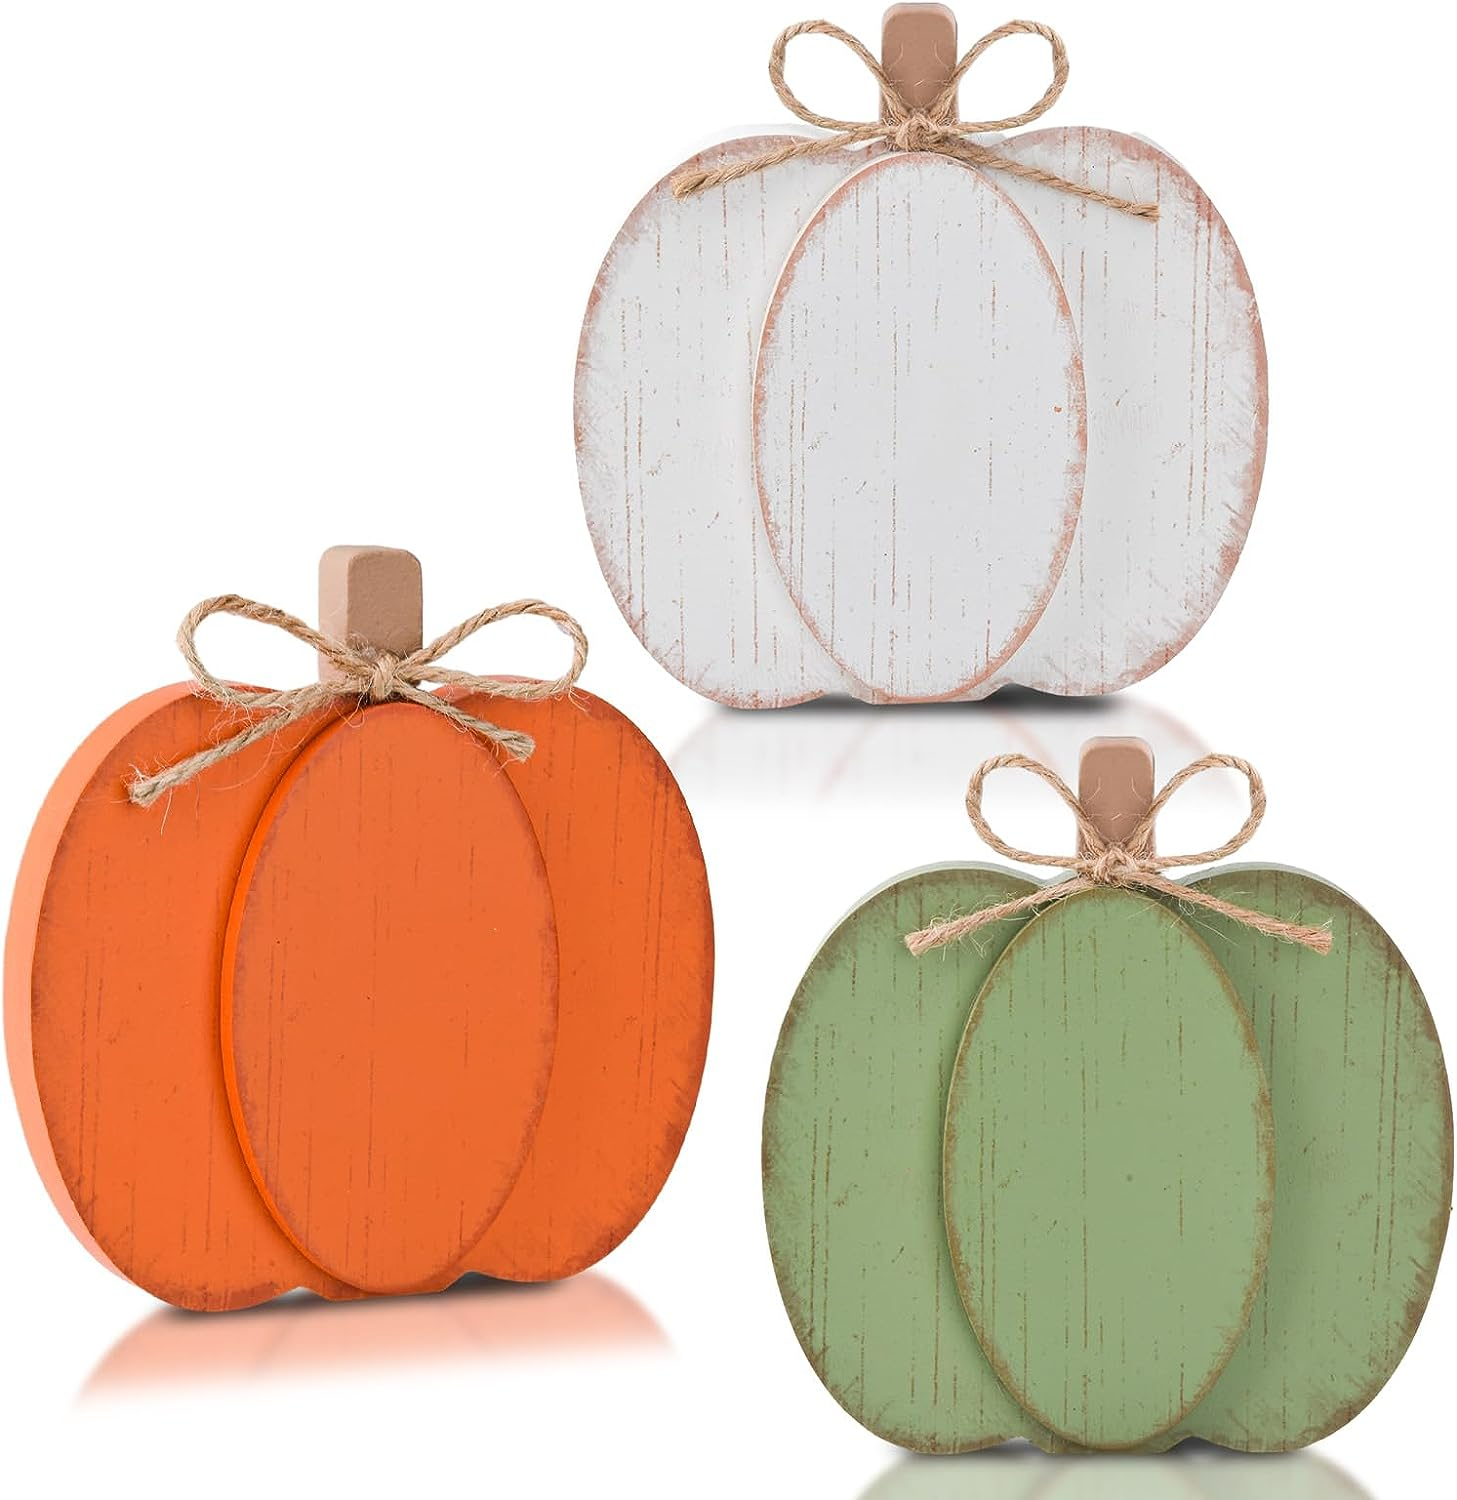 Must-See Fall Decor from Amazon - Fouts Lane